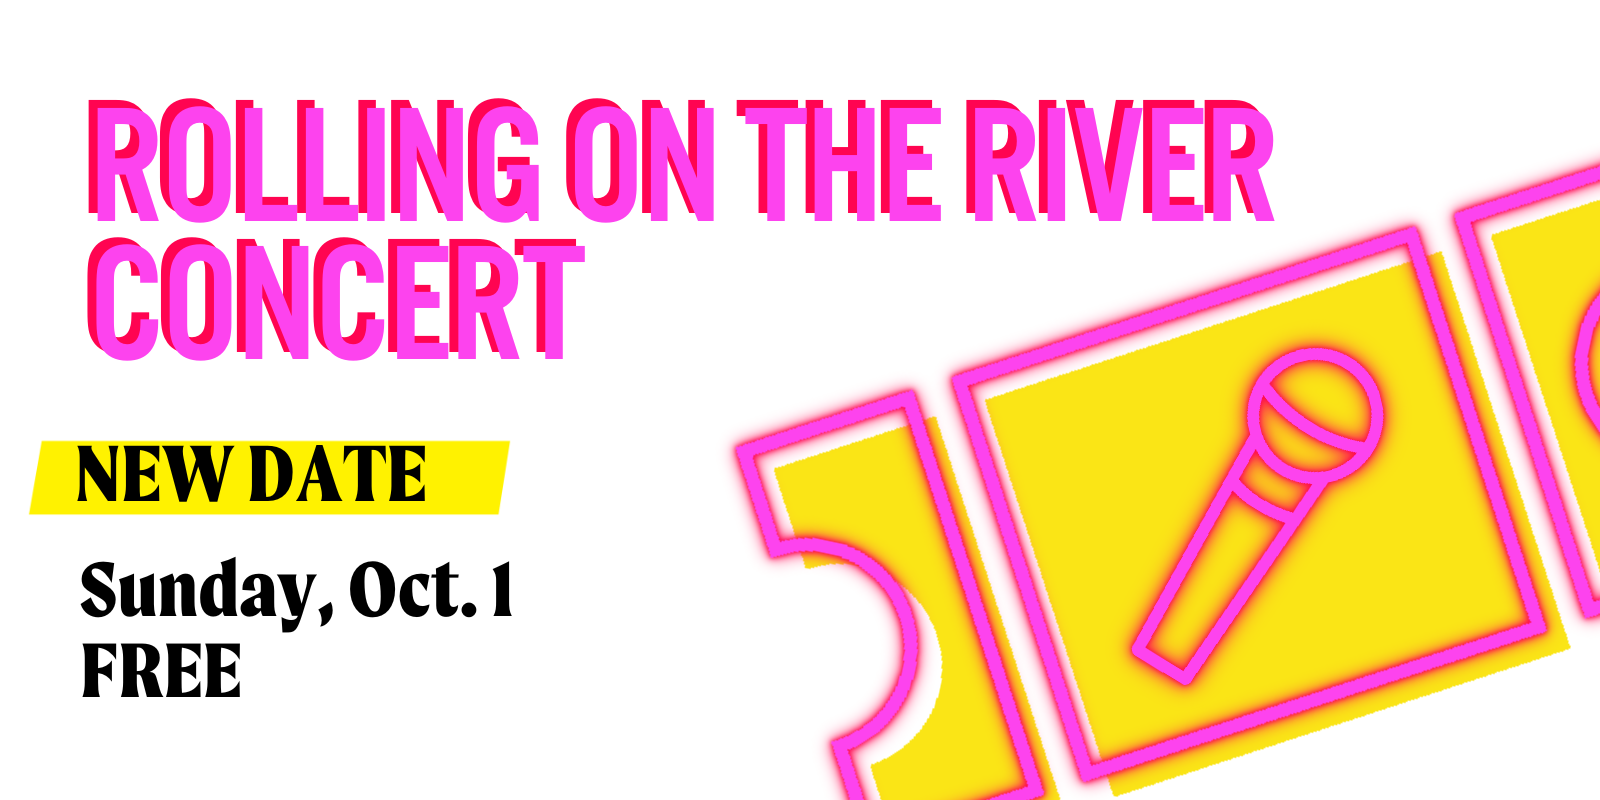 Rolling on the River Concert New Date Oct 1 District Wharf Free